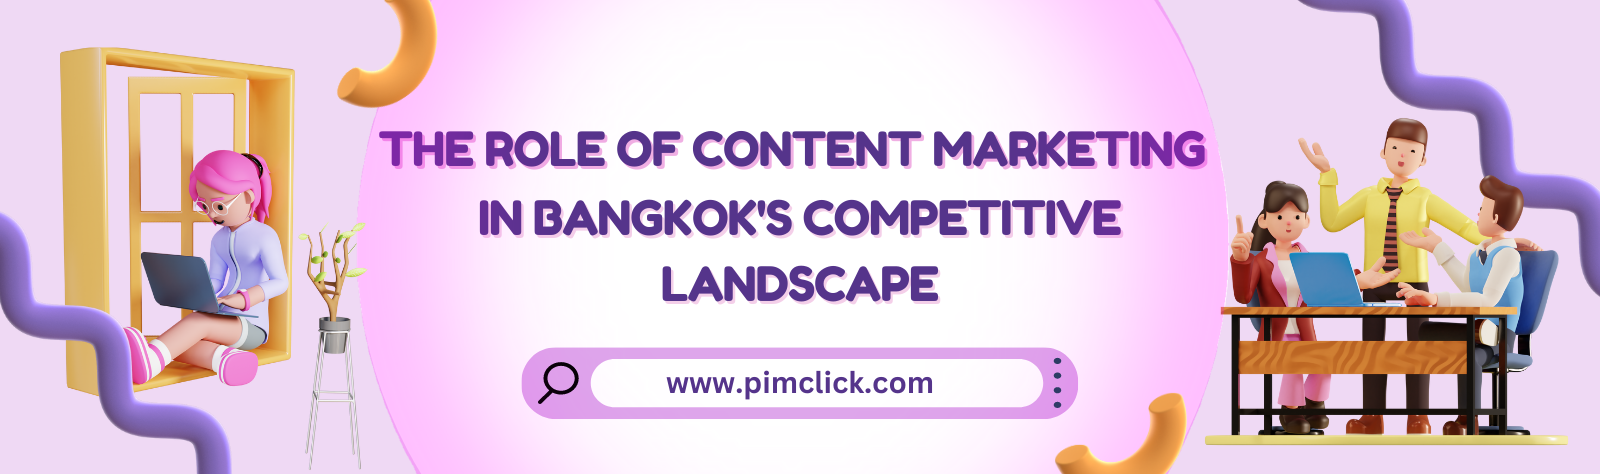 the-role-of-contentm-marketing-in-bangkoks-competitive-landscape